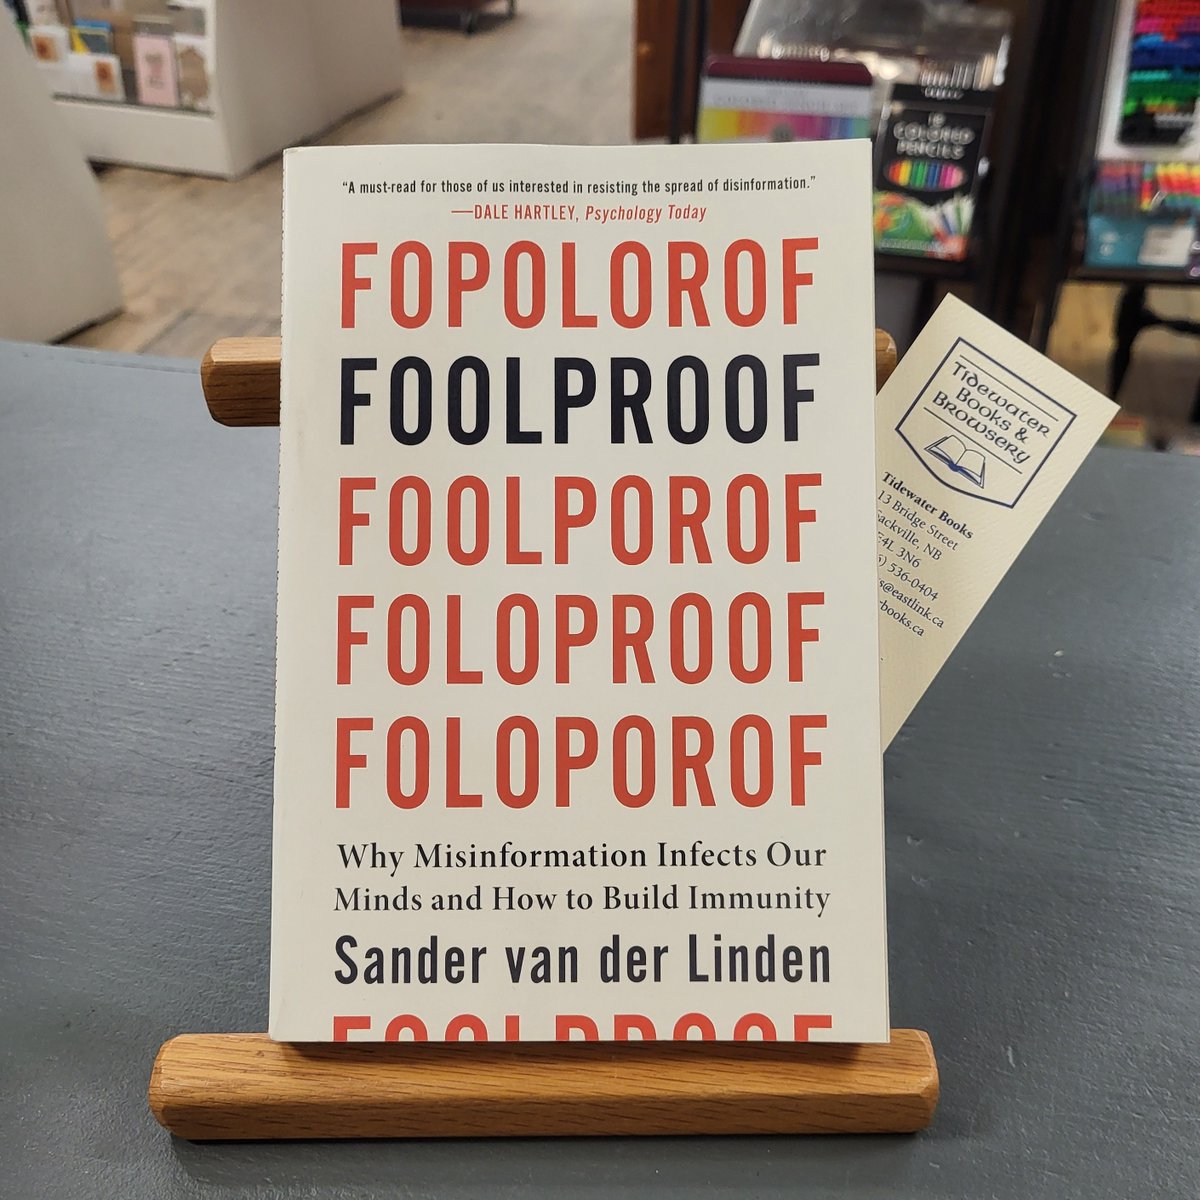 No April first fooling, today's Featured #book in-store is 'Foolproof: Why Misinformation Infects Our Minds and How to Build Immunity' by @Sander_vdLinden 💕📚 tidewaterbooks.ca @wwnorton #ShopSmall #ShopLocal #ShopIndie #ReadIndie #ThinkIndie #BookLovers #IndieBookstores